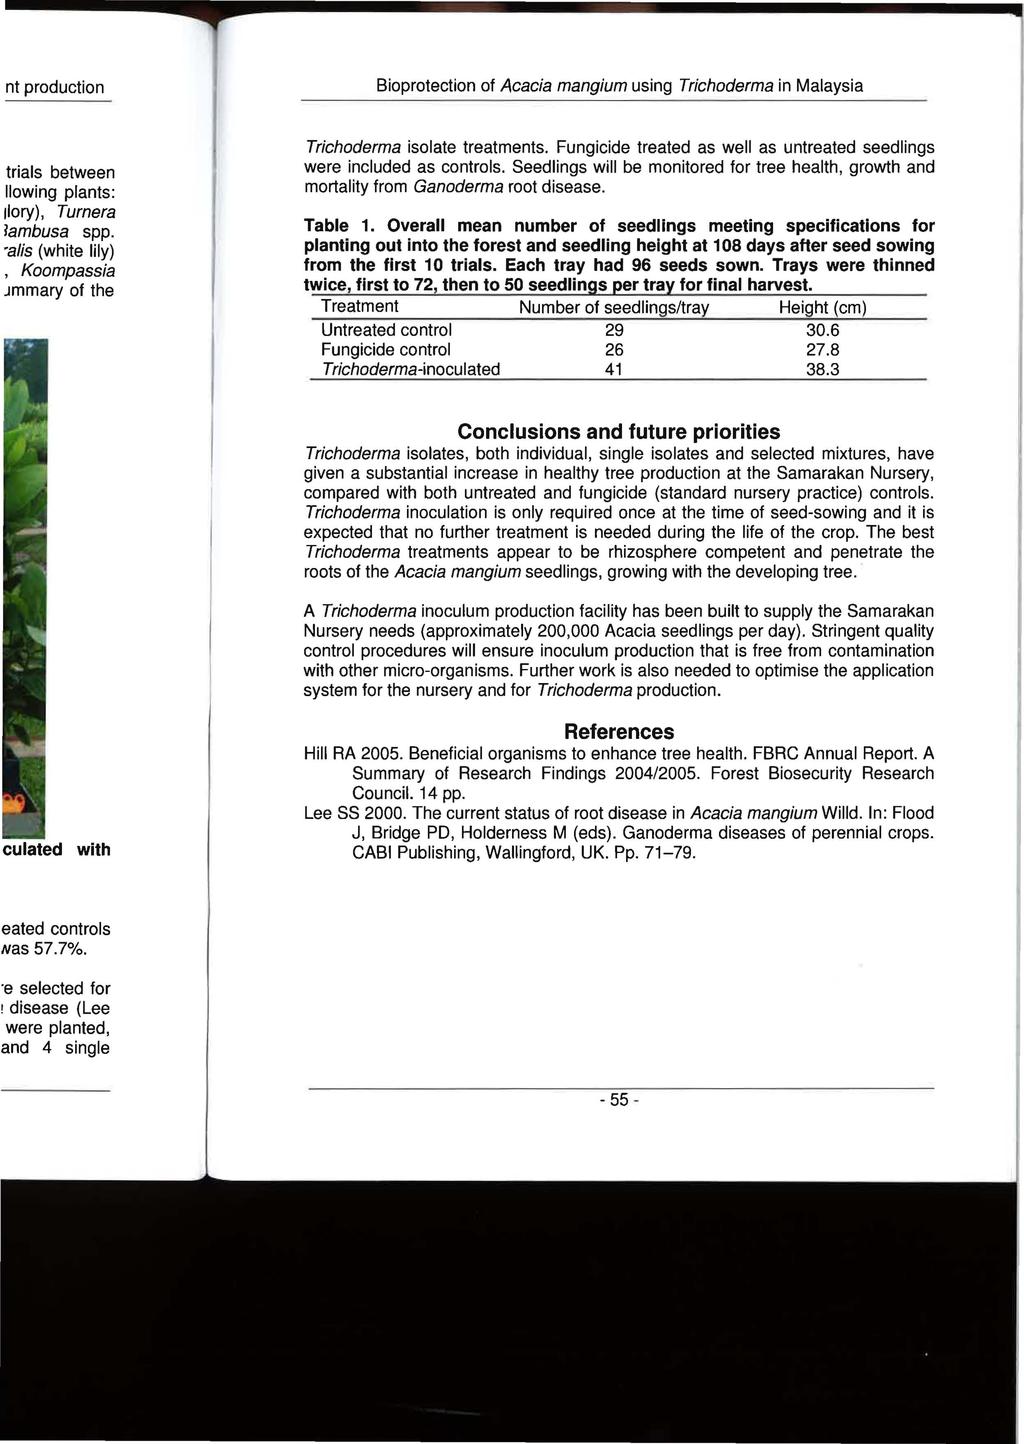 Bioprotection of Acacia mangium using Trichoderma in Malaysia Trichoderma isolate treatments. Fungicide treated as well as untreated seedlings were included as controls.